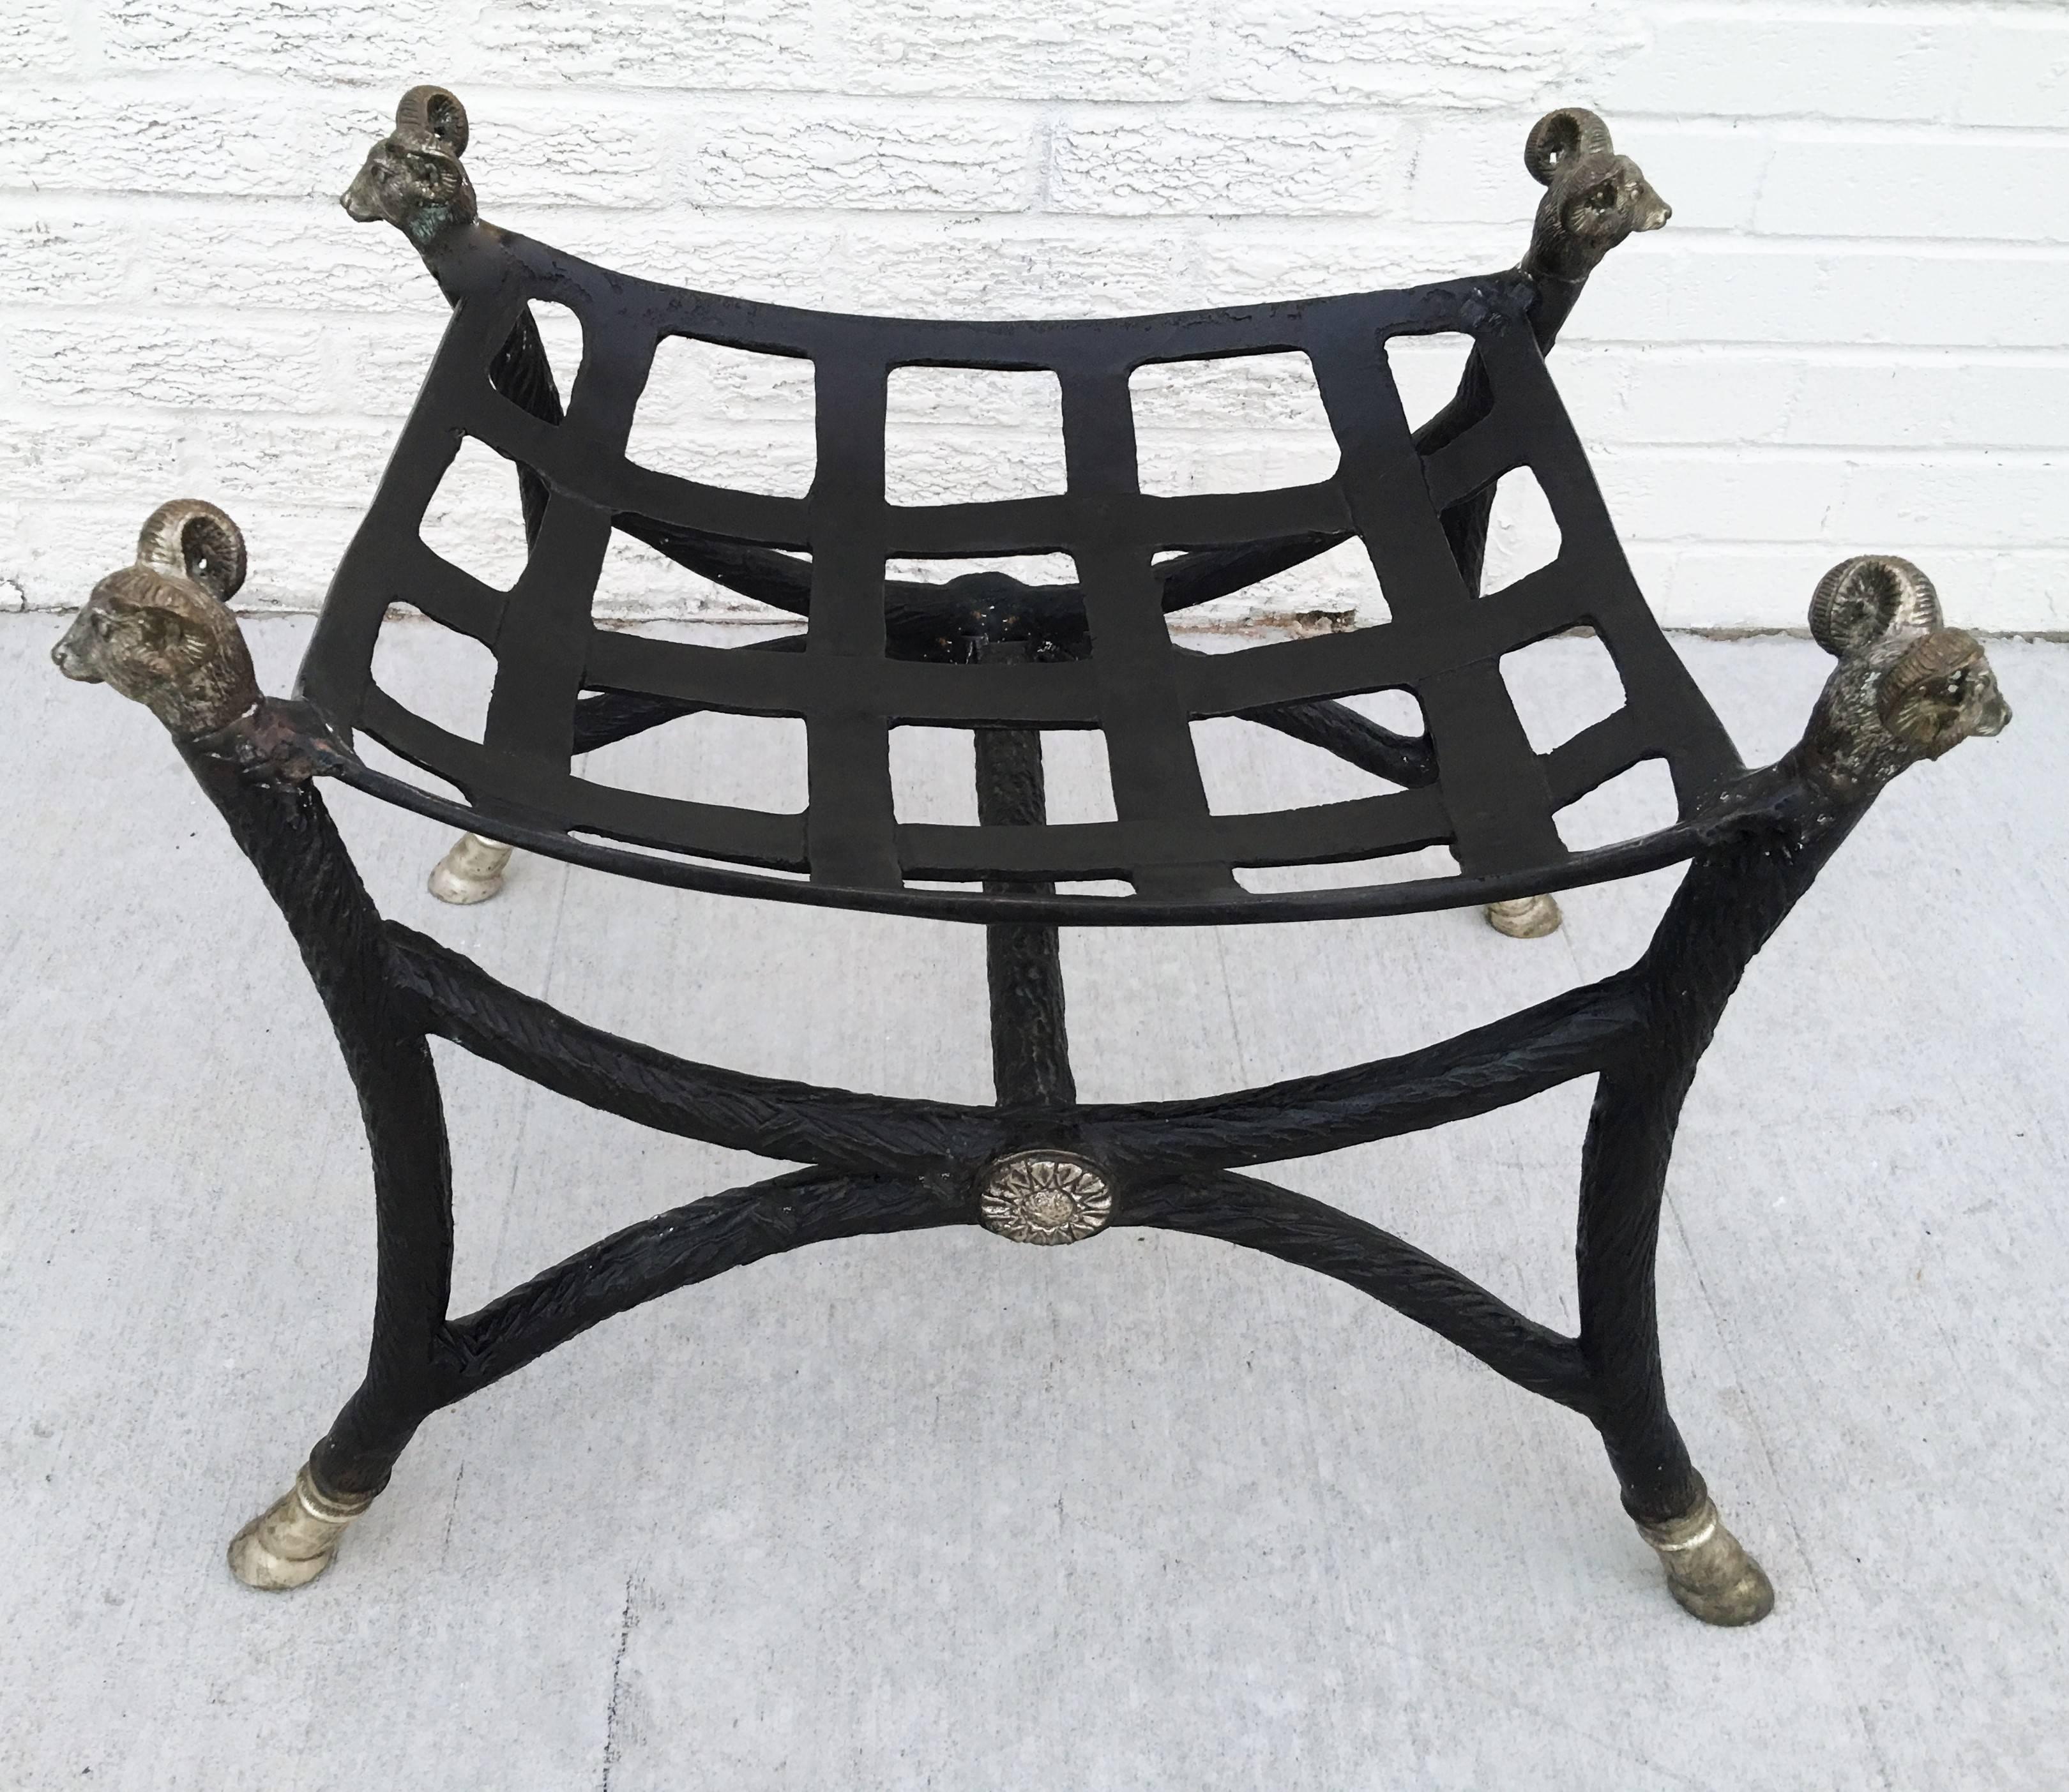 Hand-Forged bench in Curule form, removable silk cushion, X-Frame with hoof feet, ram-heads with undulating-manes and each grasping a crescent moon- shaped ring. The distinctive heavy weight and hammered surface of the iron are both integral